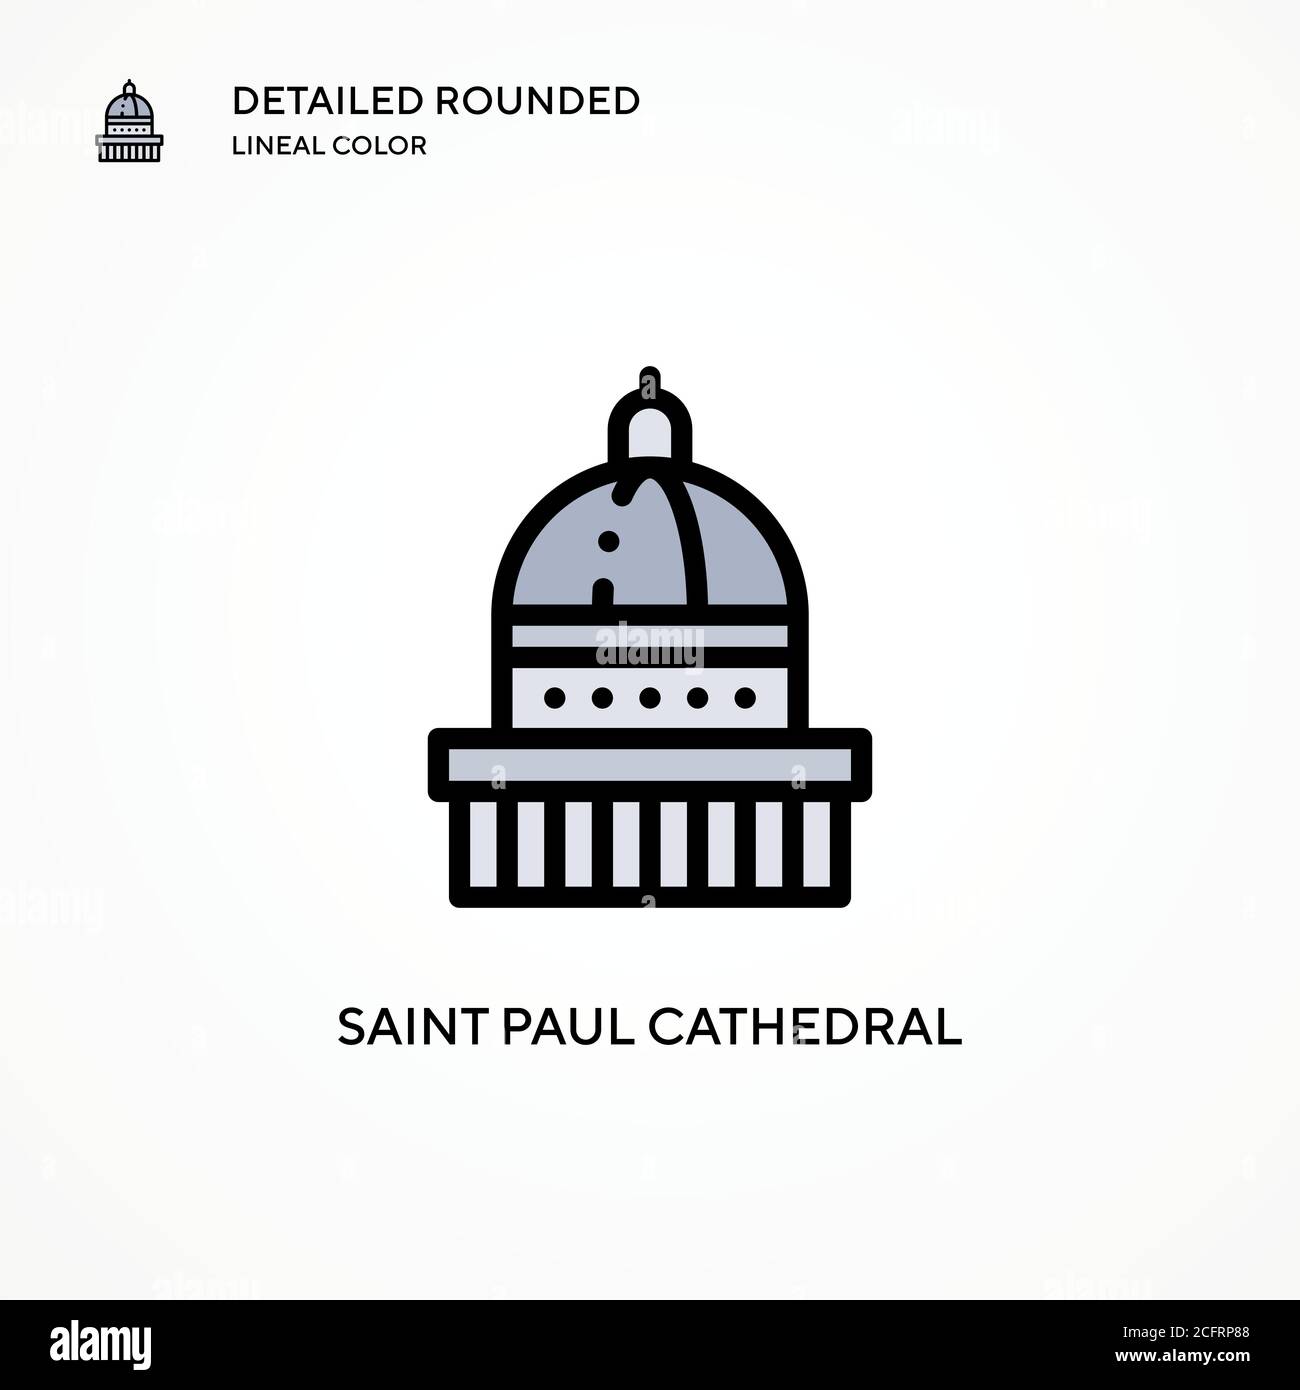 Saint paul cathedral vector icon. Modern vector illustration concepts. Easy to edit and customize. Stock Vector